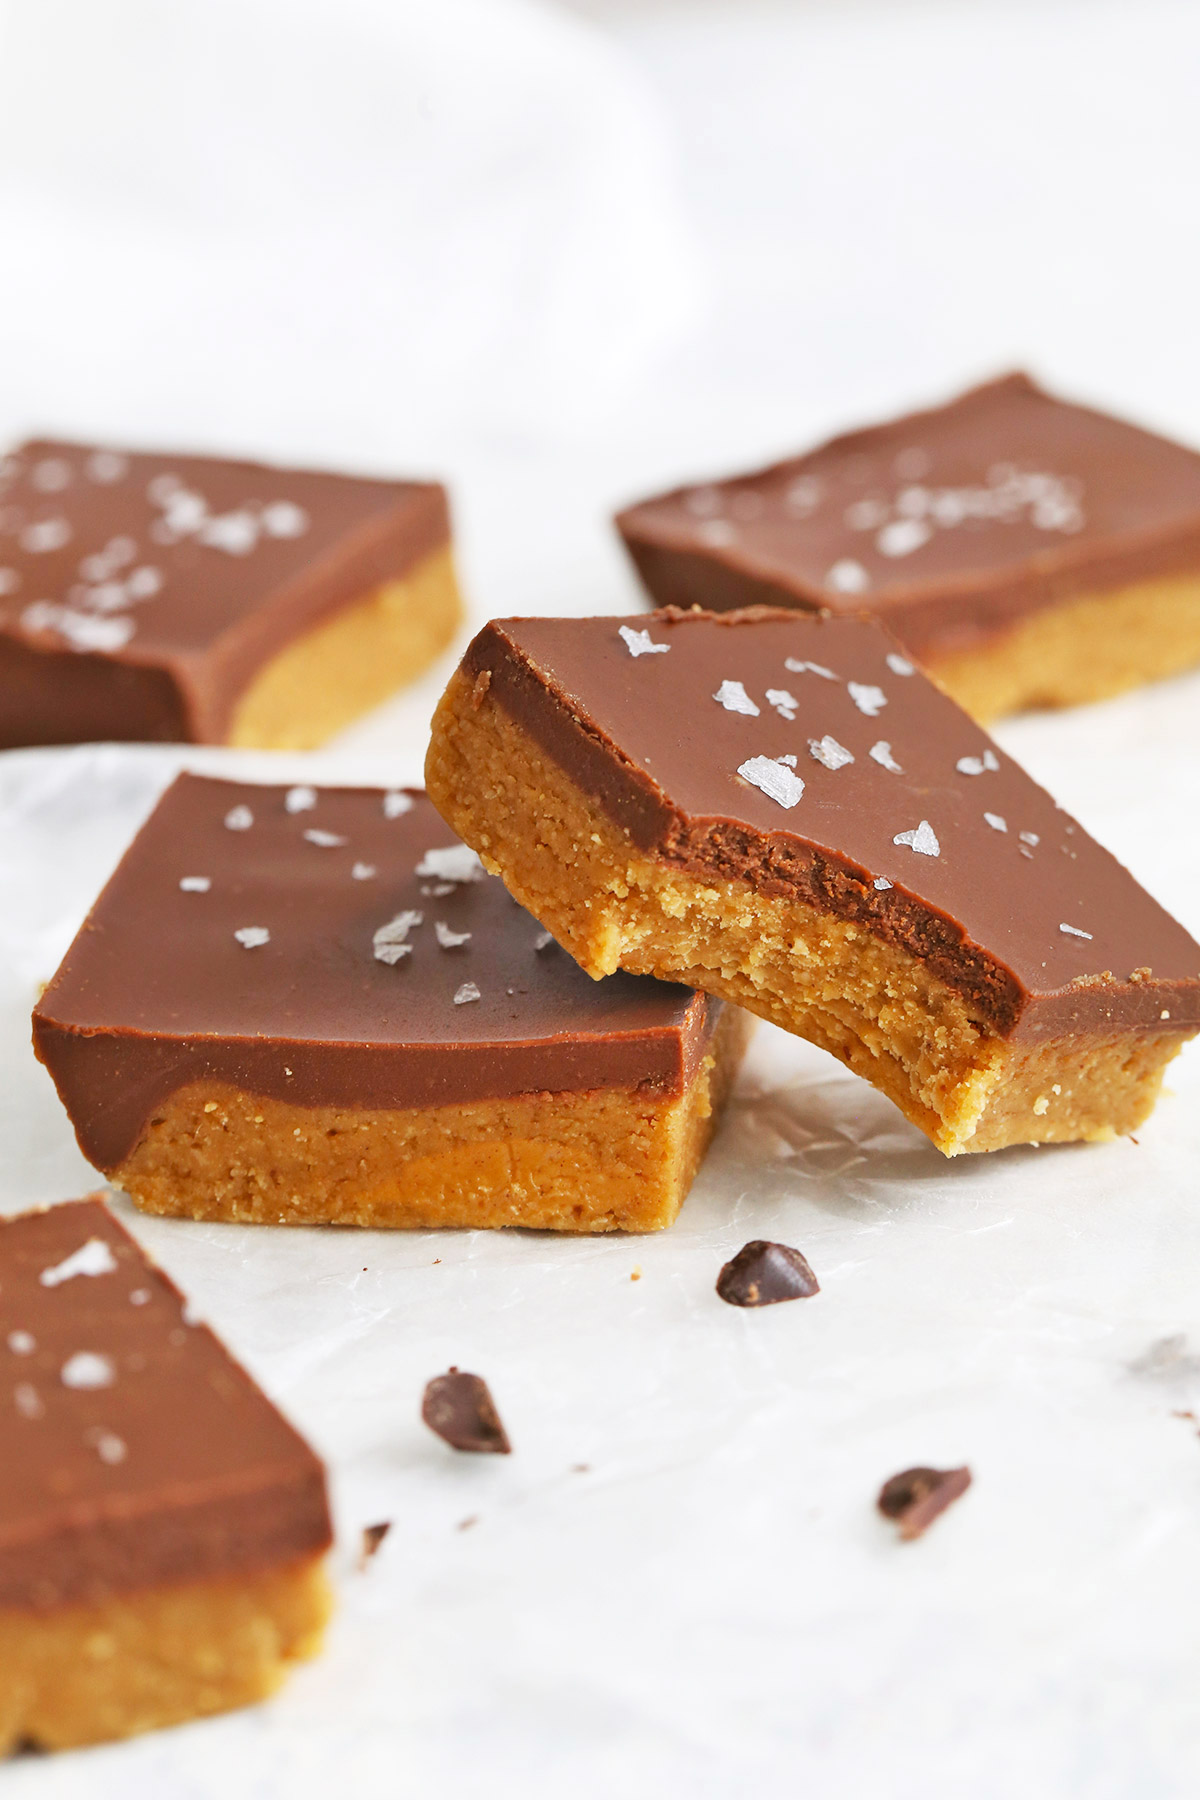 Healthy No Bake Chocolate Peanut Butter Bars from One Lovely Life